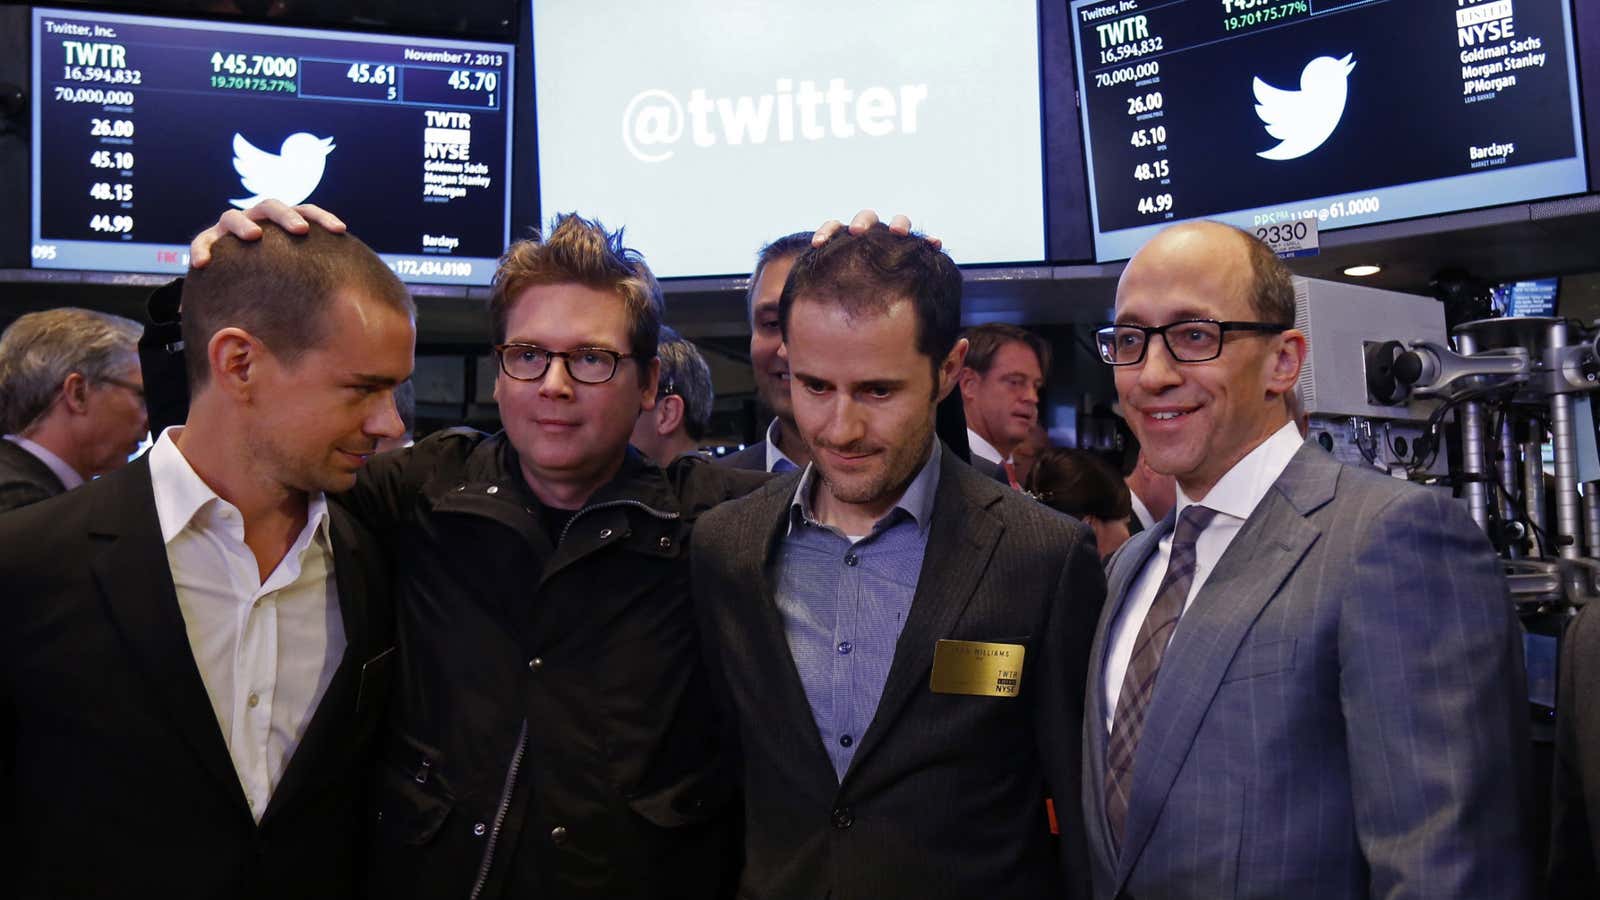 Twitter made these guys rich, but other entrepreneurs will be lucky.